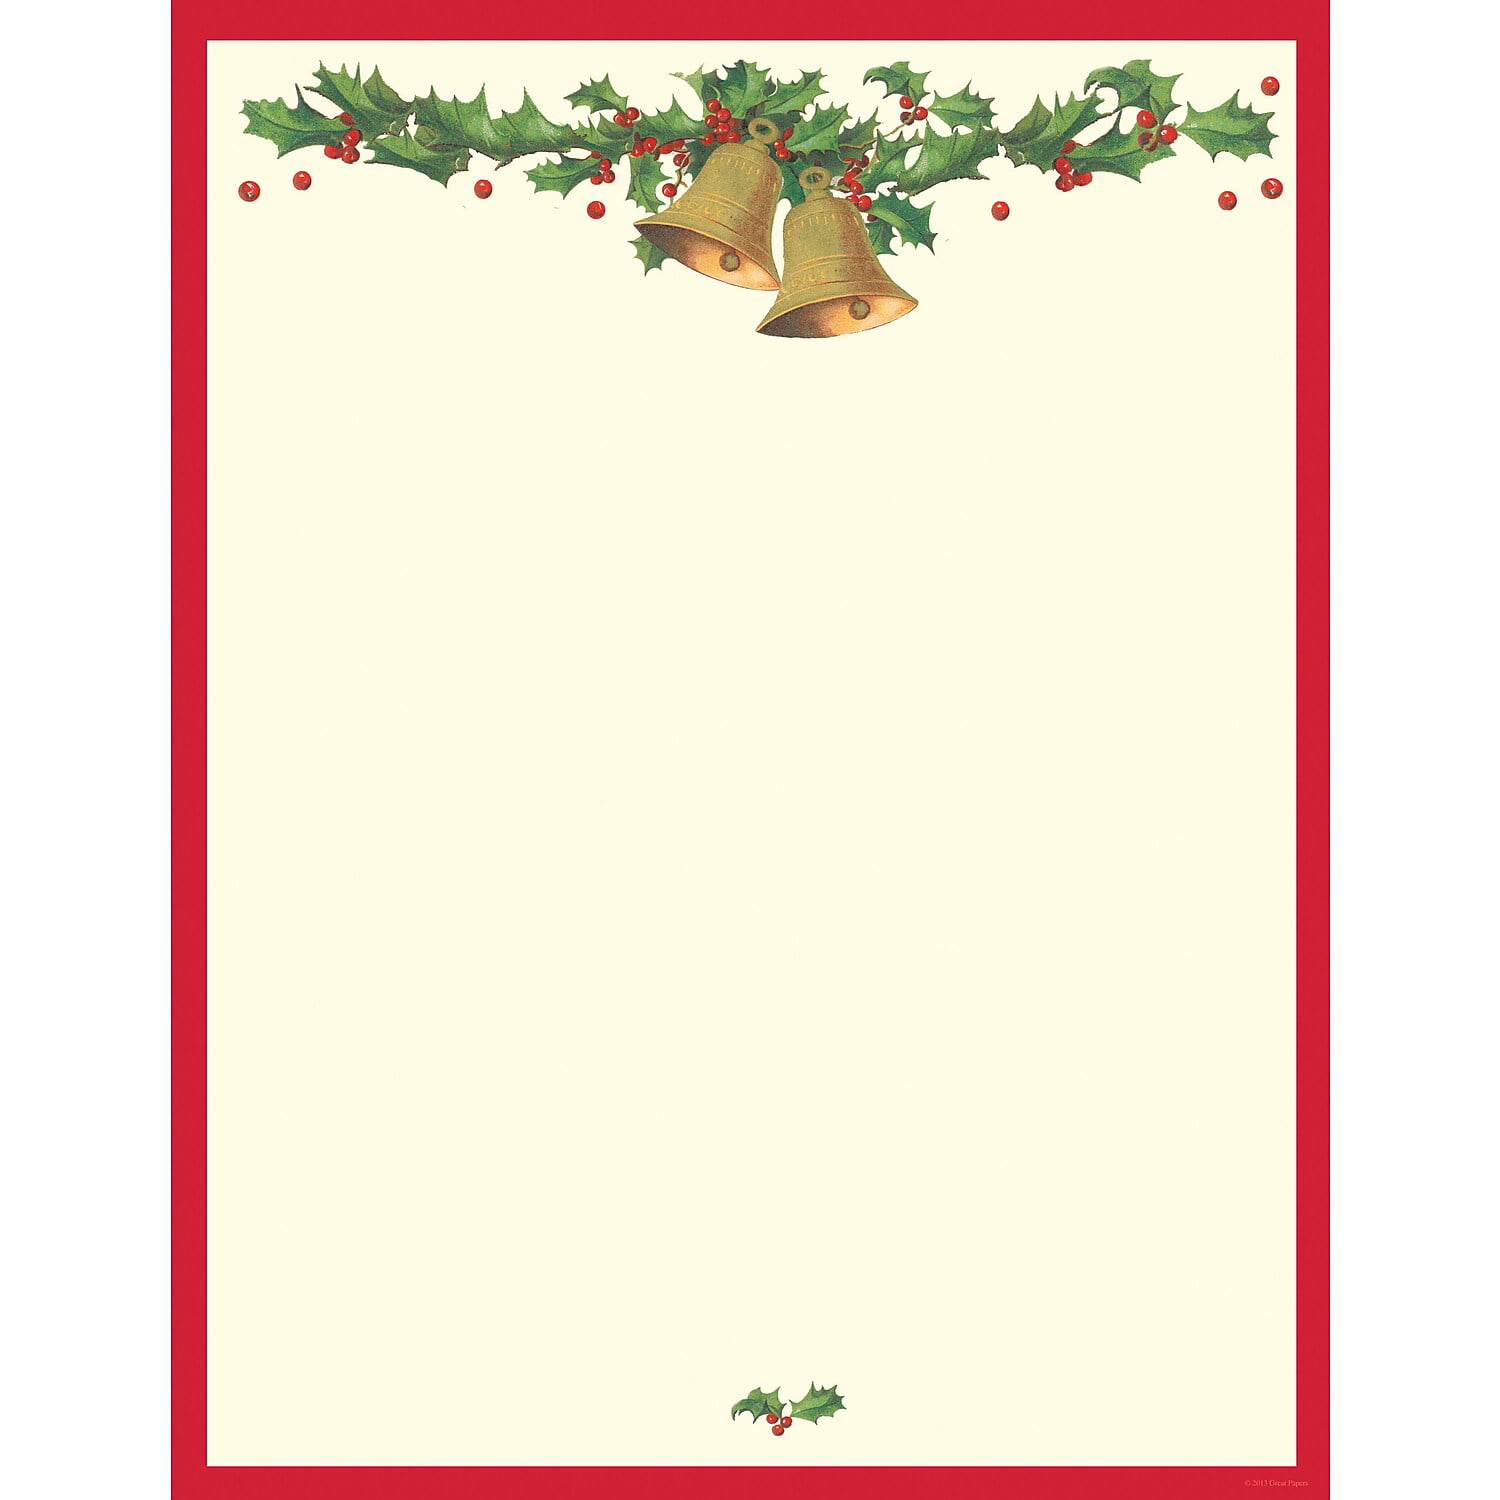 11 x 8.5 25 count 20103016 Great Papers Falling Holly Letterhead